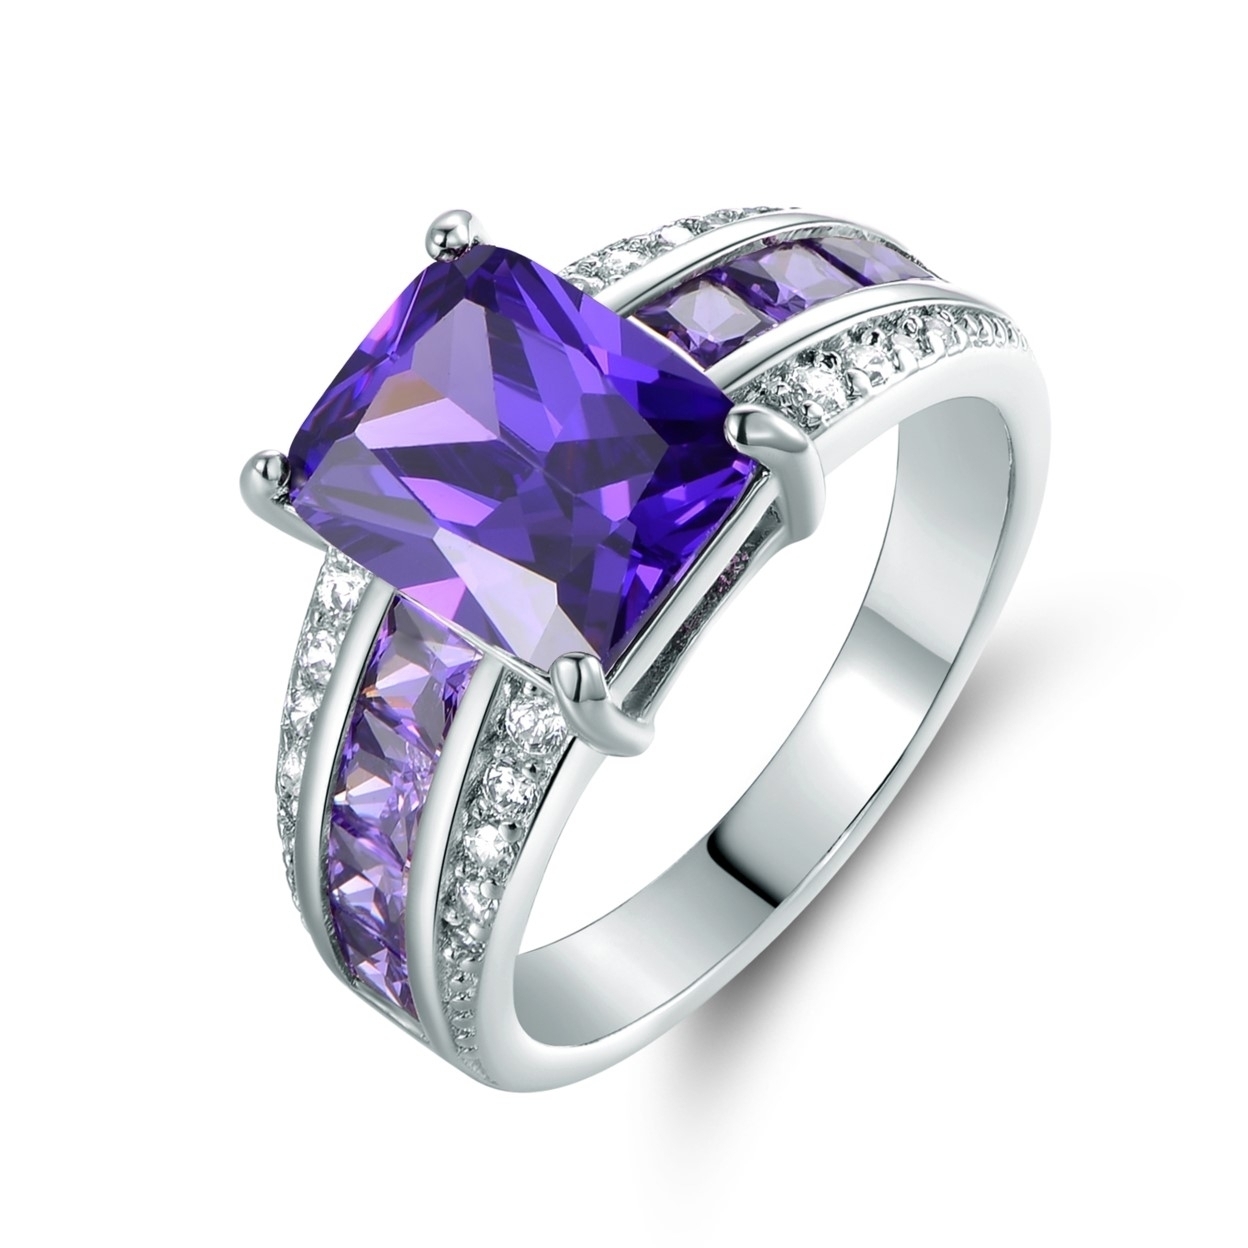 Princess Cut Amethyst Ring For Women – Refined 18K Gold-Plated Engagement Ring Adorned With Amethyst And Cubic Zirconia Stones - 7